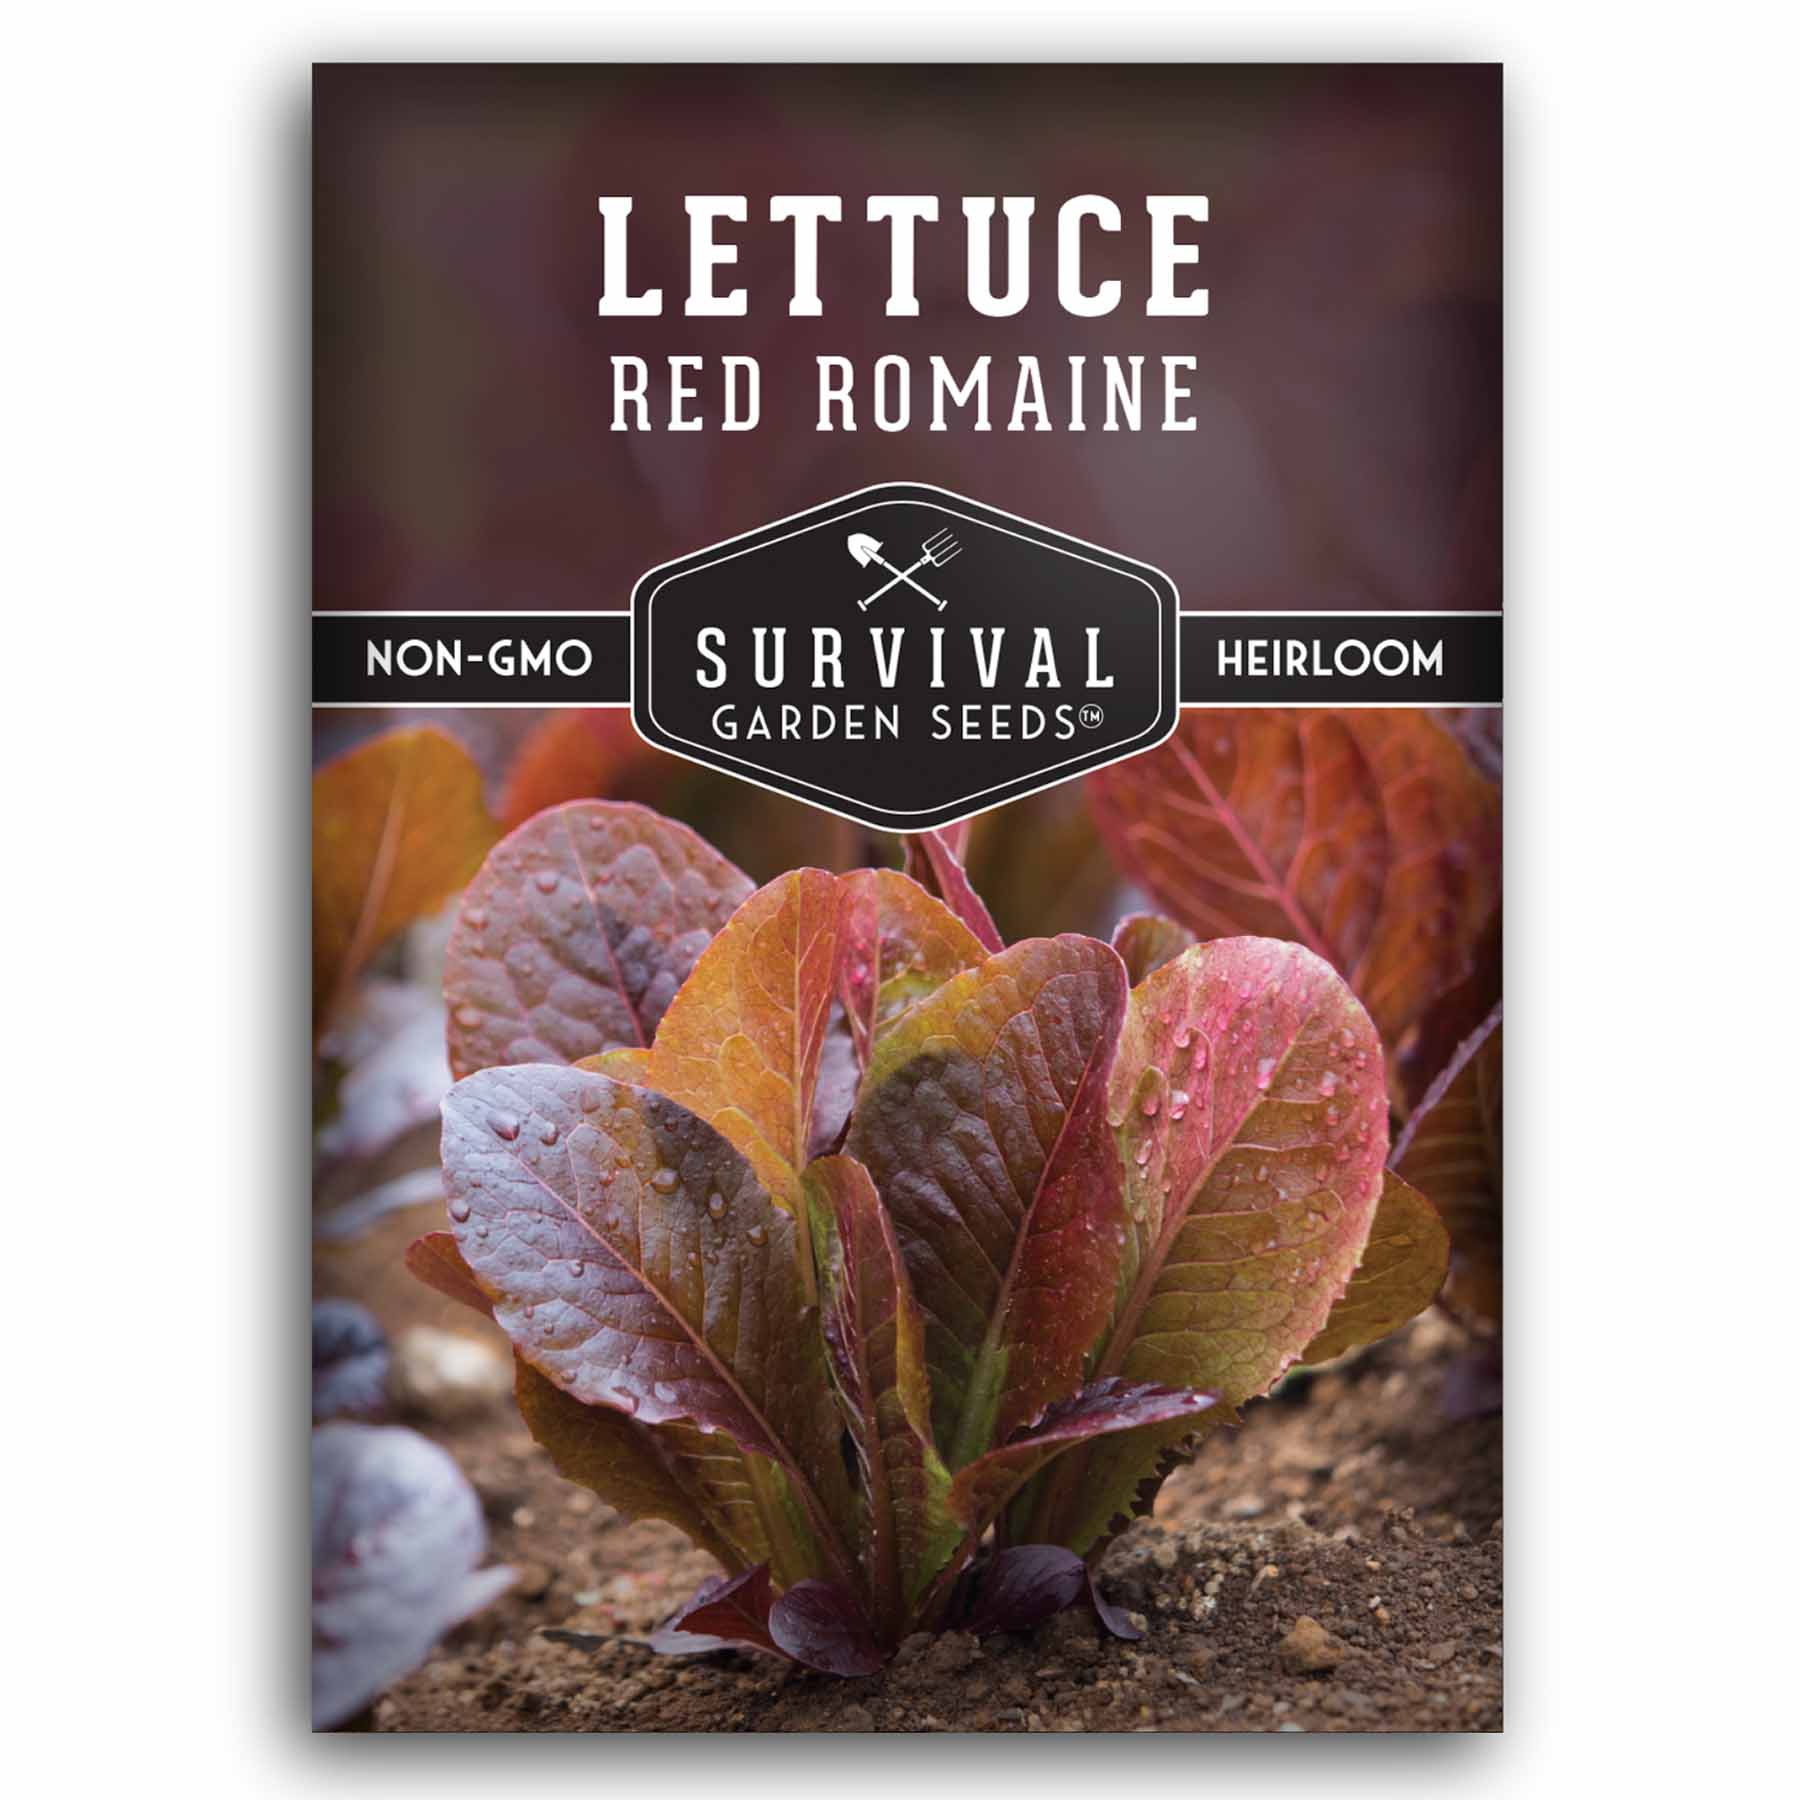 1 packet of Red Romaine Lettuce seeds